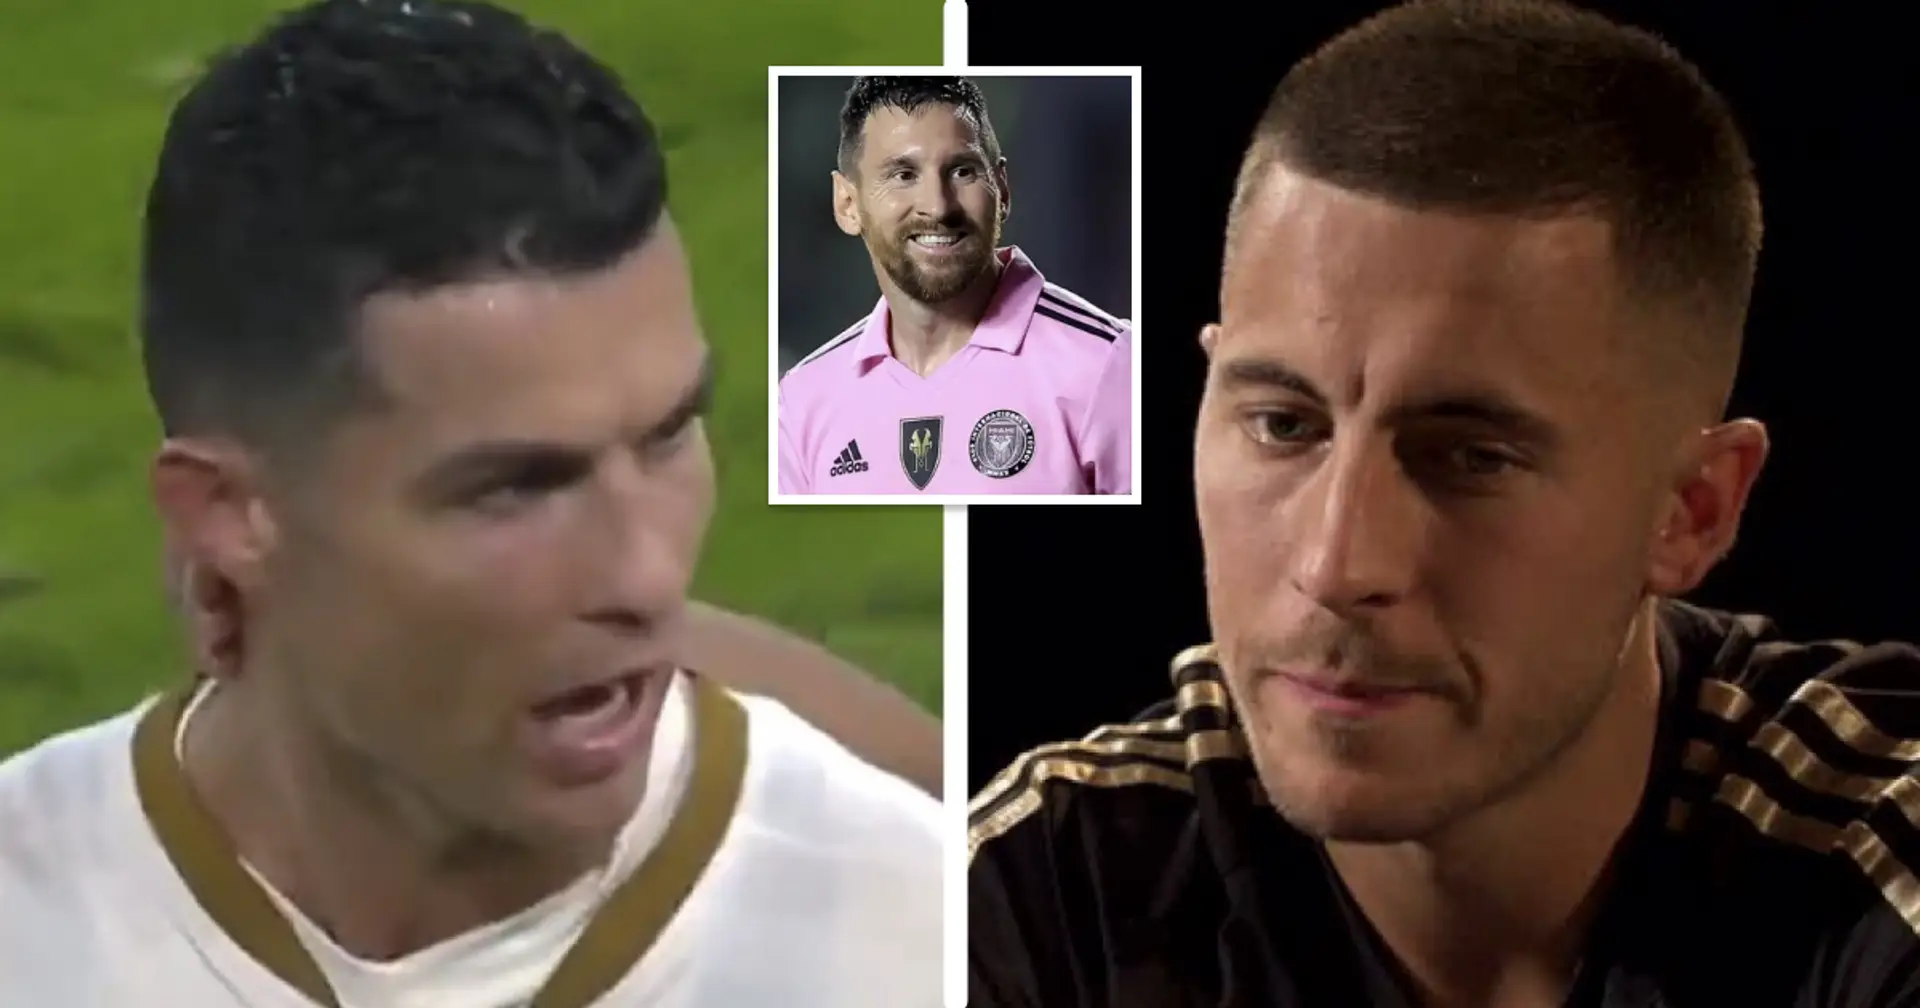 Hazard: Cristiano wasn't bigger than me in terms of pure football. Messi is the greatest